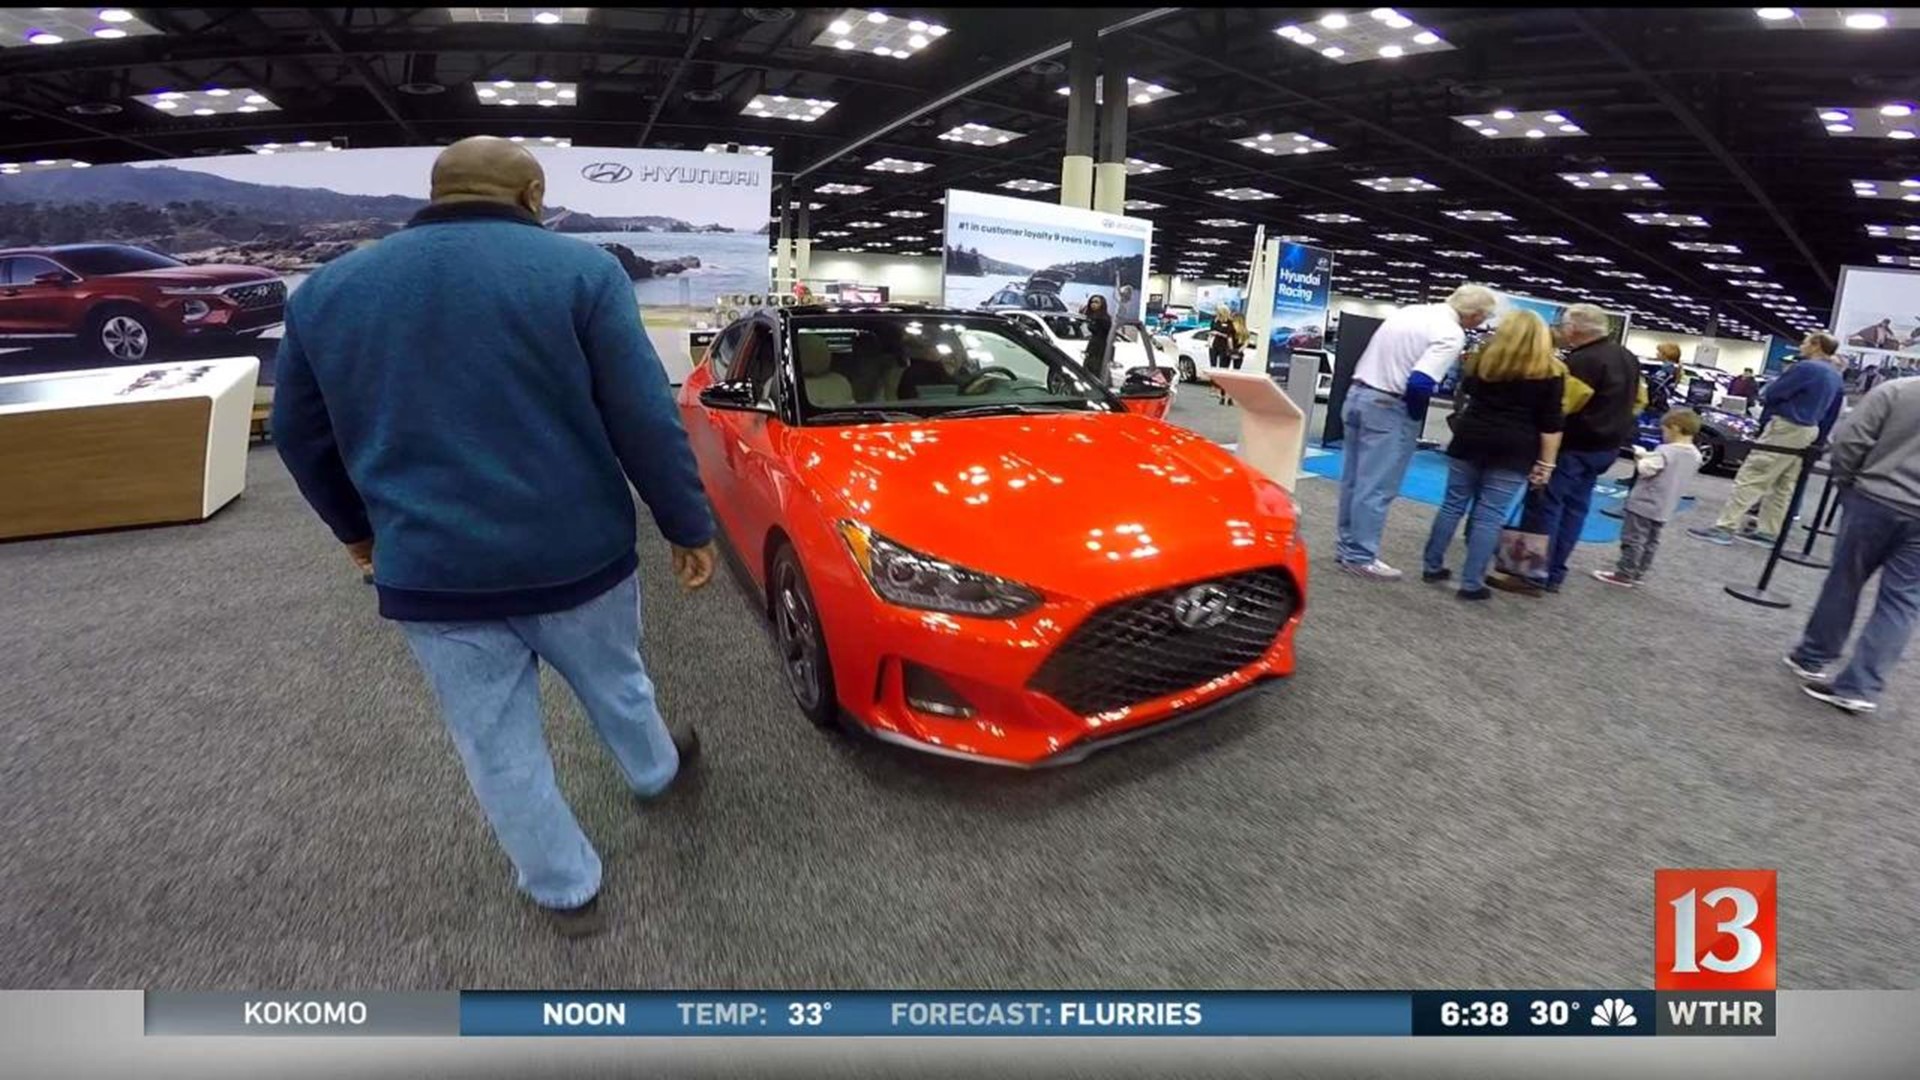 Indy Auto Show runs through New Year's Day